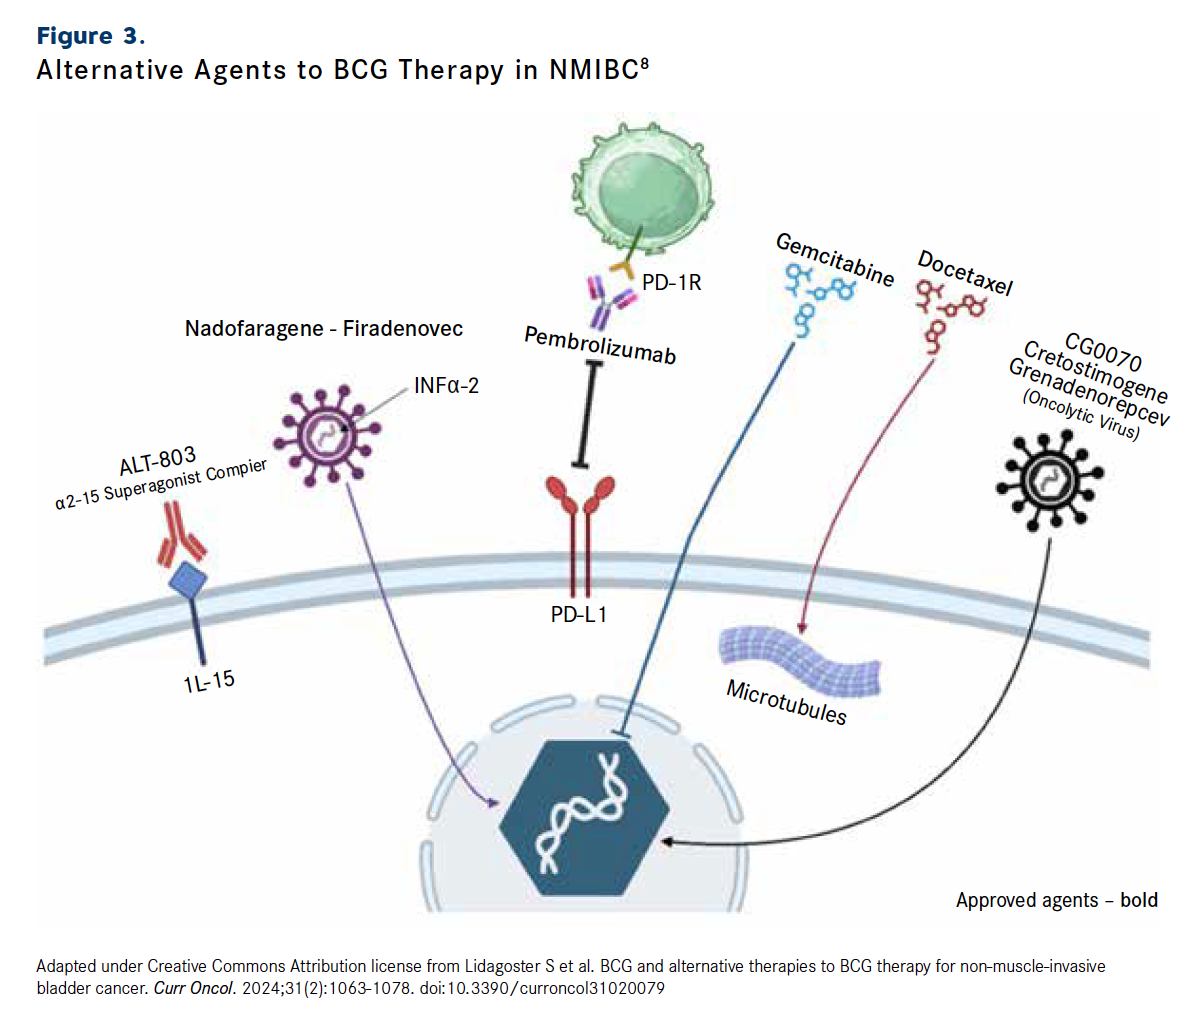 Figure 3. Alternative Agents to BCG Therapy in NMIBC8